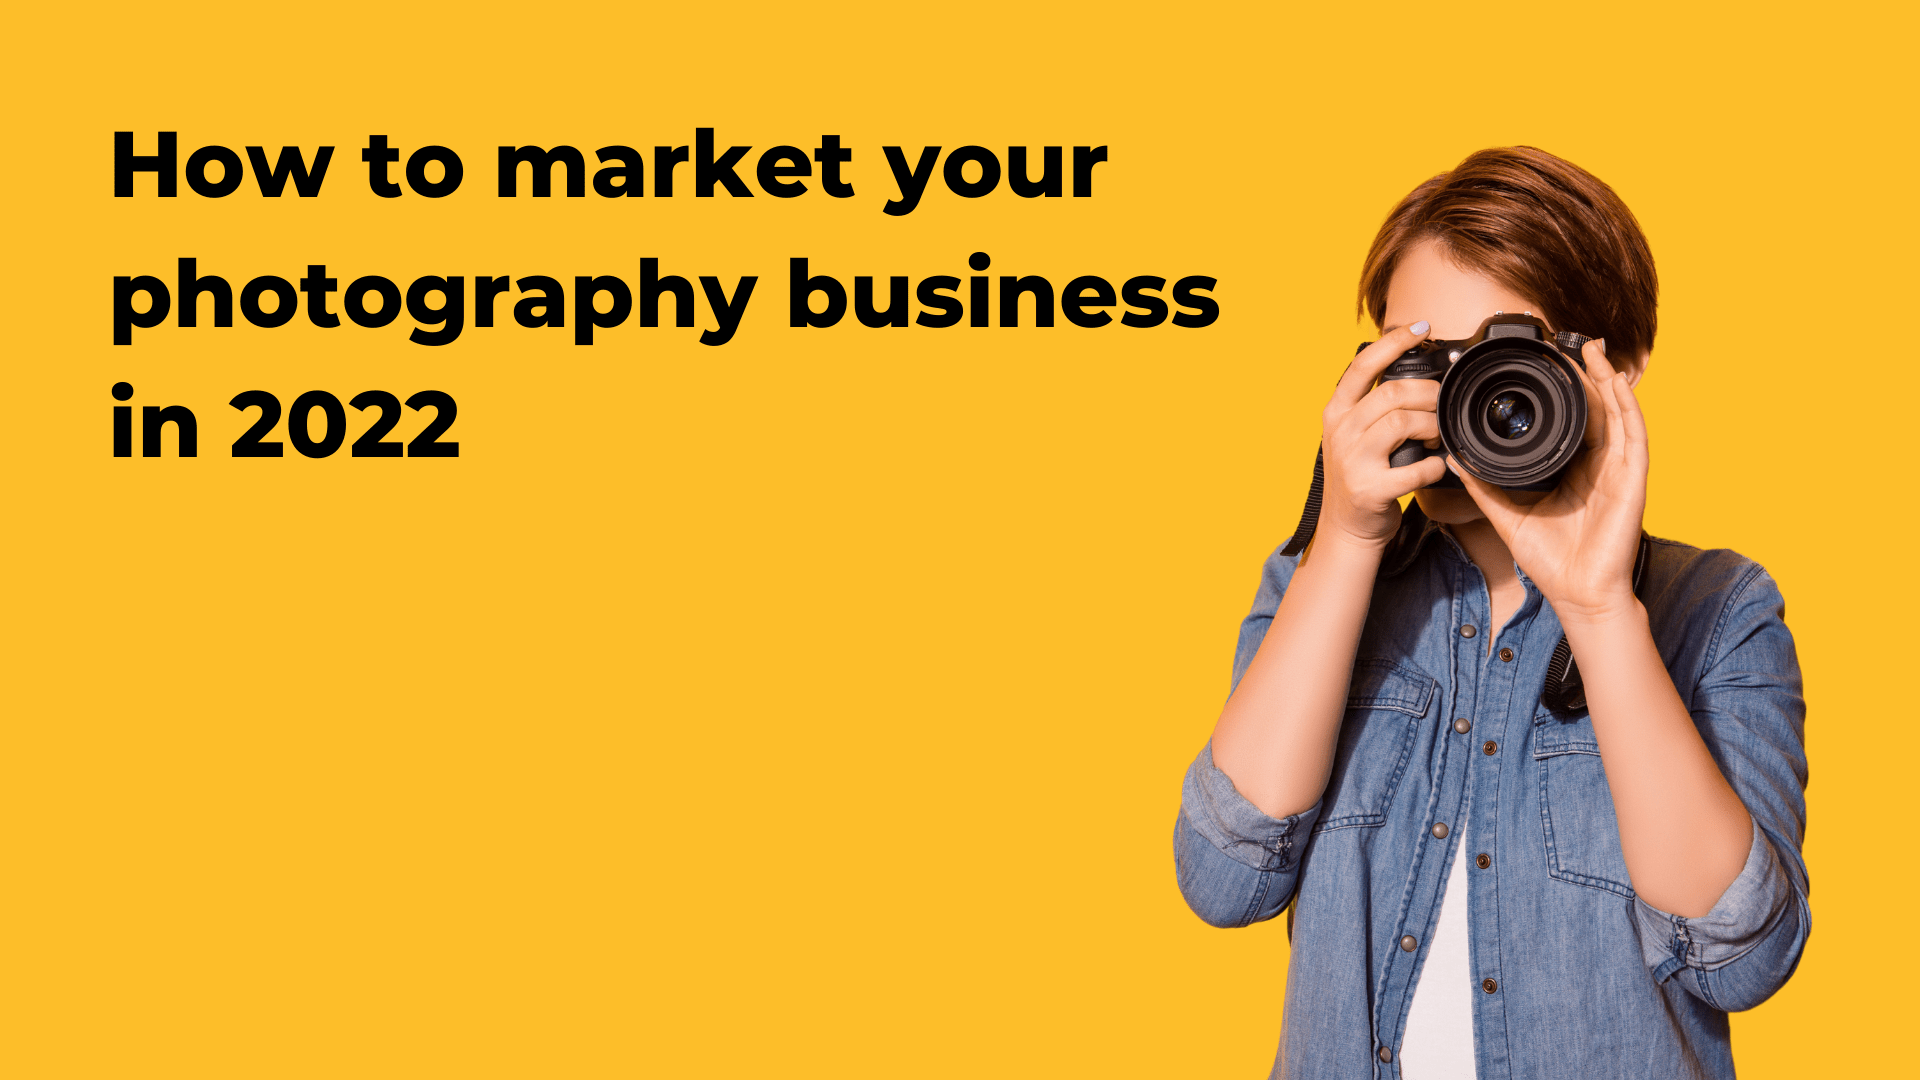 8 tips to market your photography business in 2022